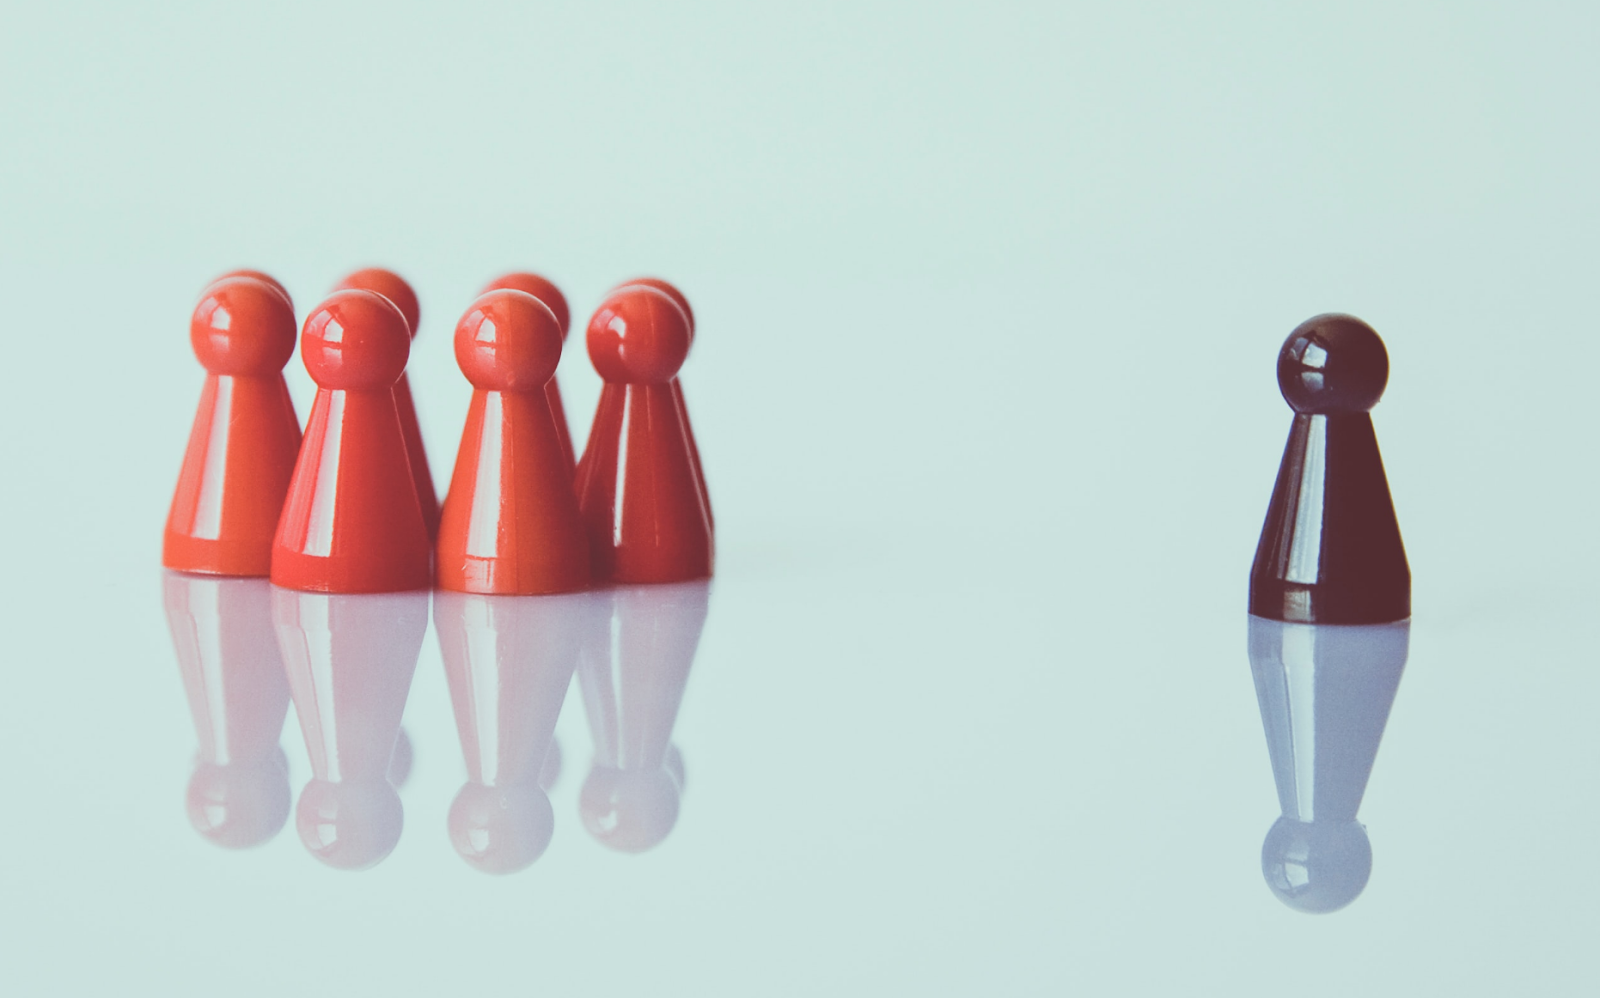 Measuring Leadership Effectively From All Sides